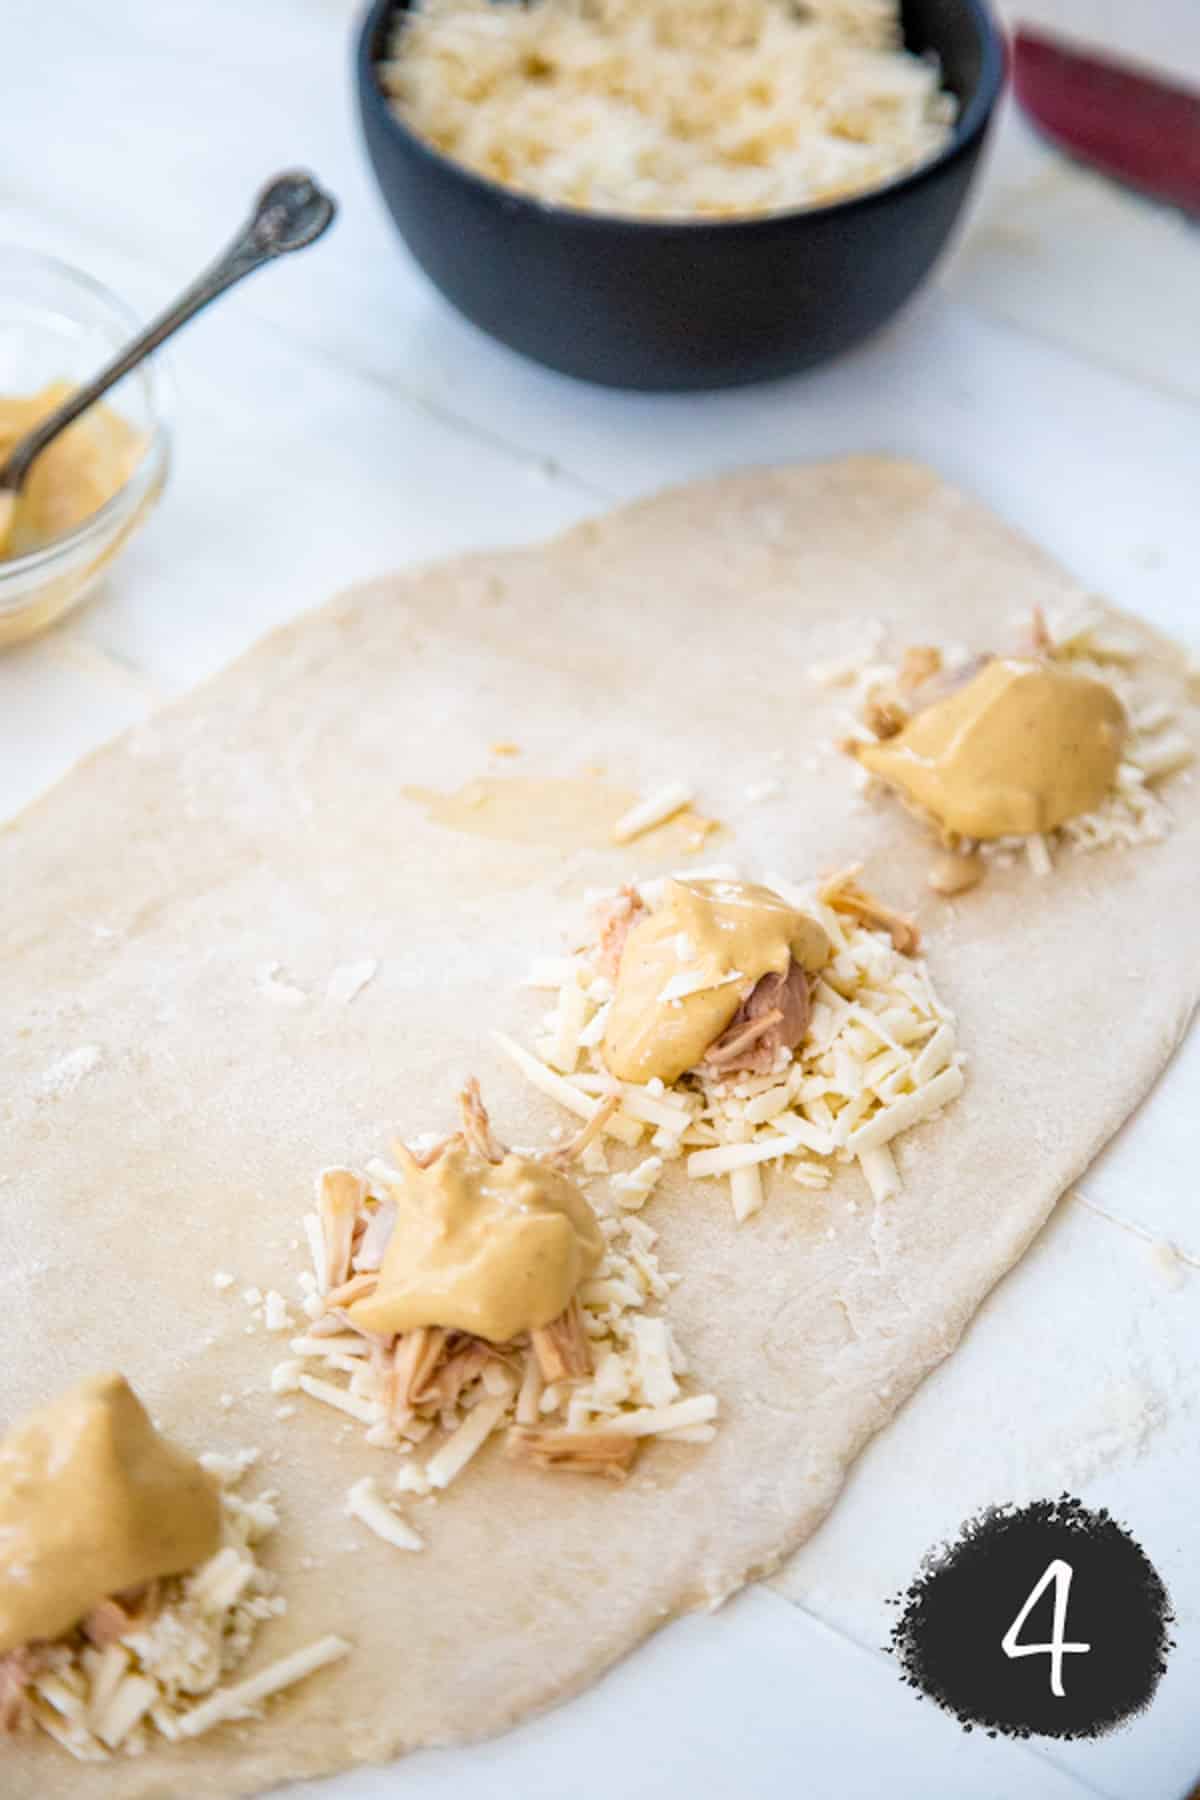 Pizza dough with dollops of cheese, shredded jackfruit, and sauce.